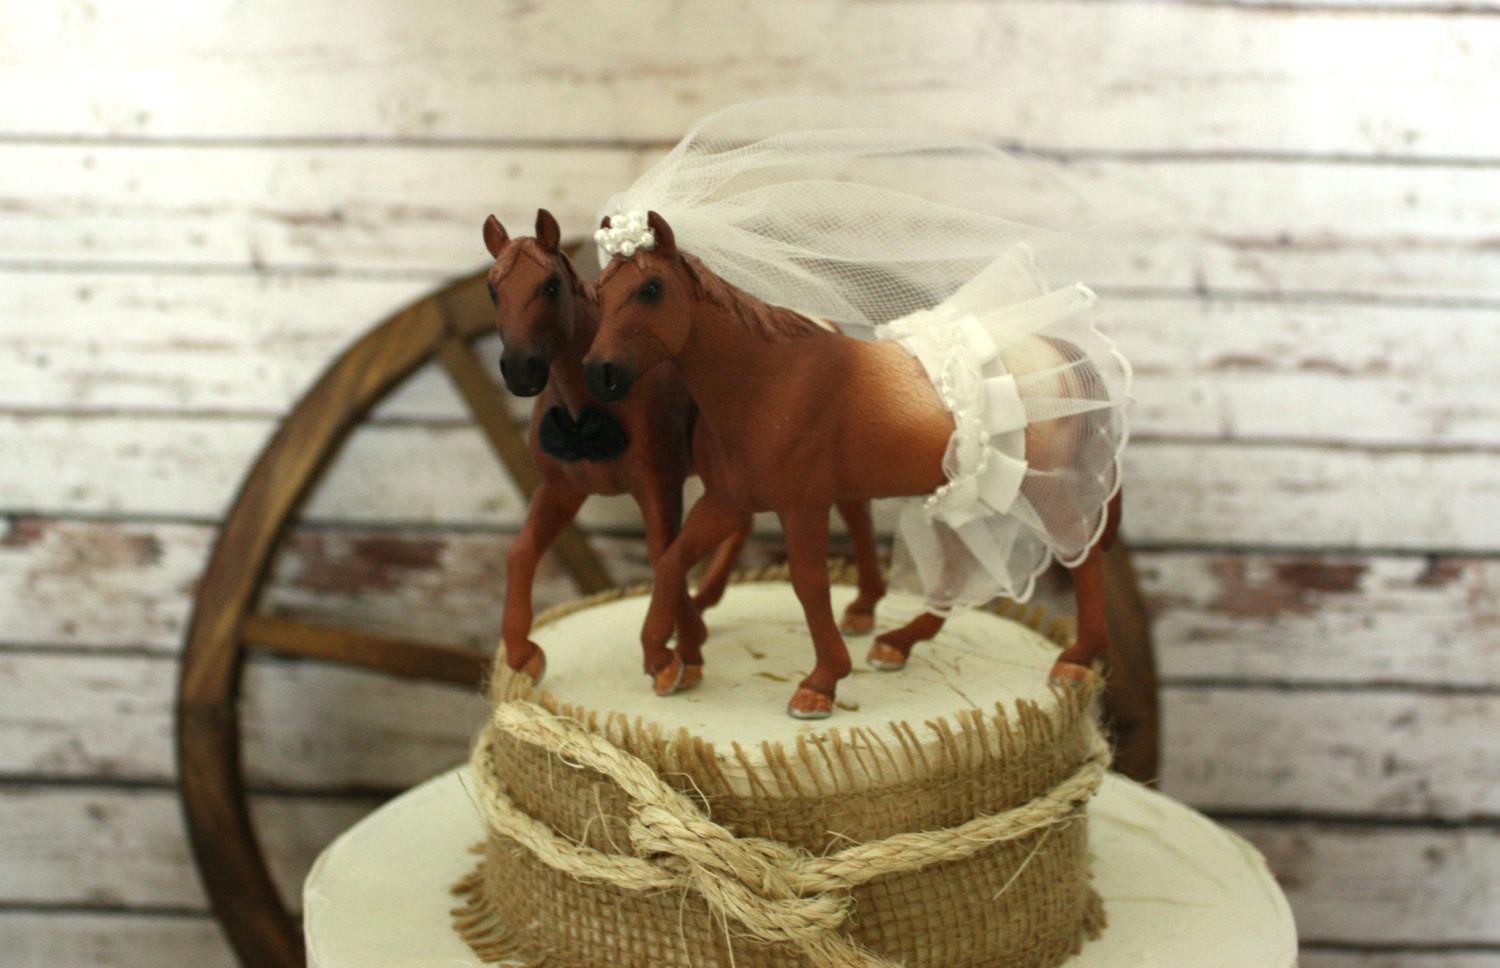 Horse Cake Toppers For Wedding Cakes
 Horse wedding cake toppers Include Your Love of Horses